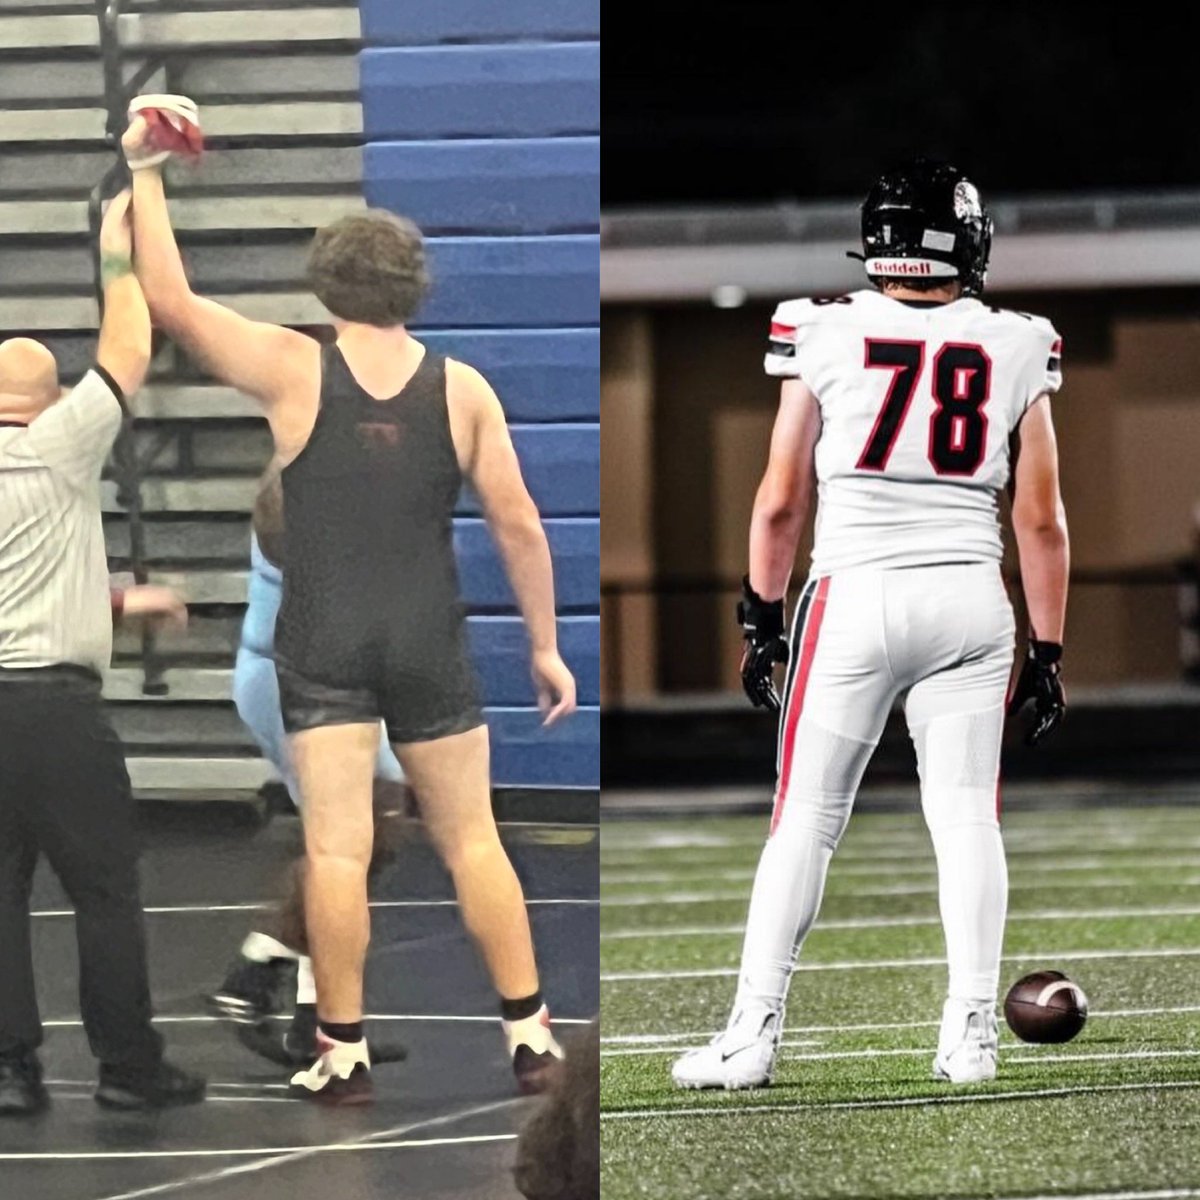 Southridge Football extremely proud of 2026 DL Ryan Miret picking up his first D1 offer from @EKUFootball per @Coach__Jake #Blessed #Highschool #RidgeUp #Recruiting @ryan_miret